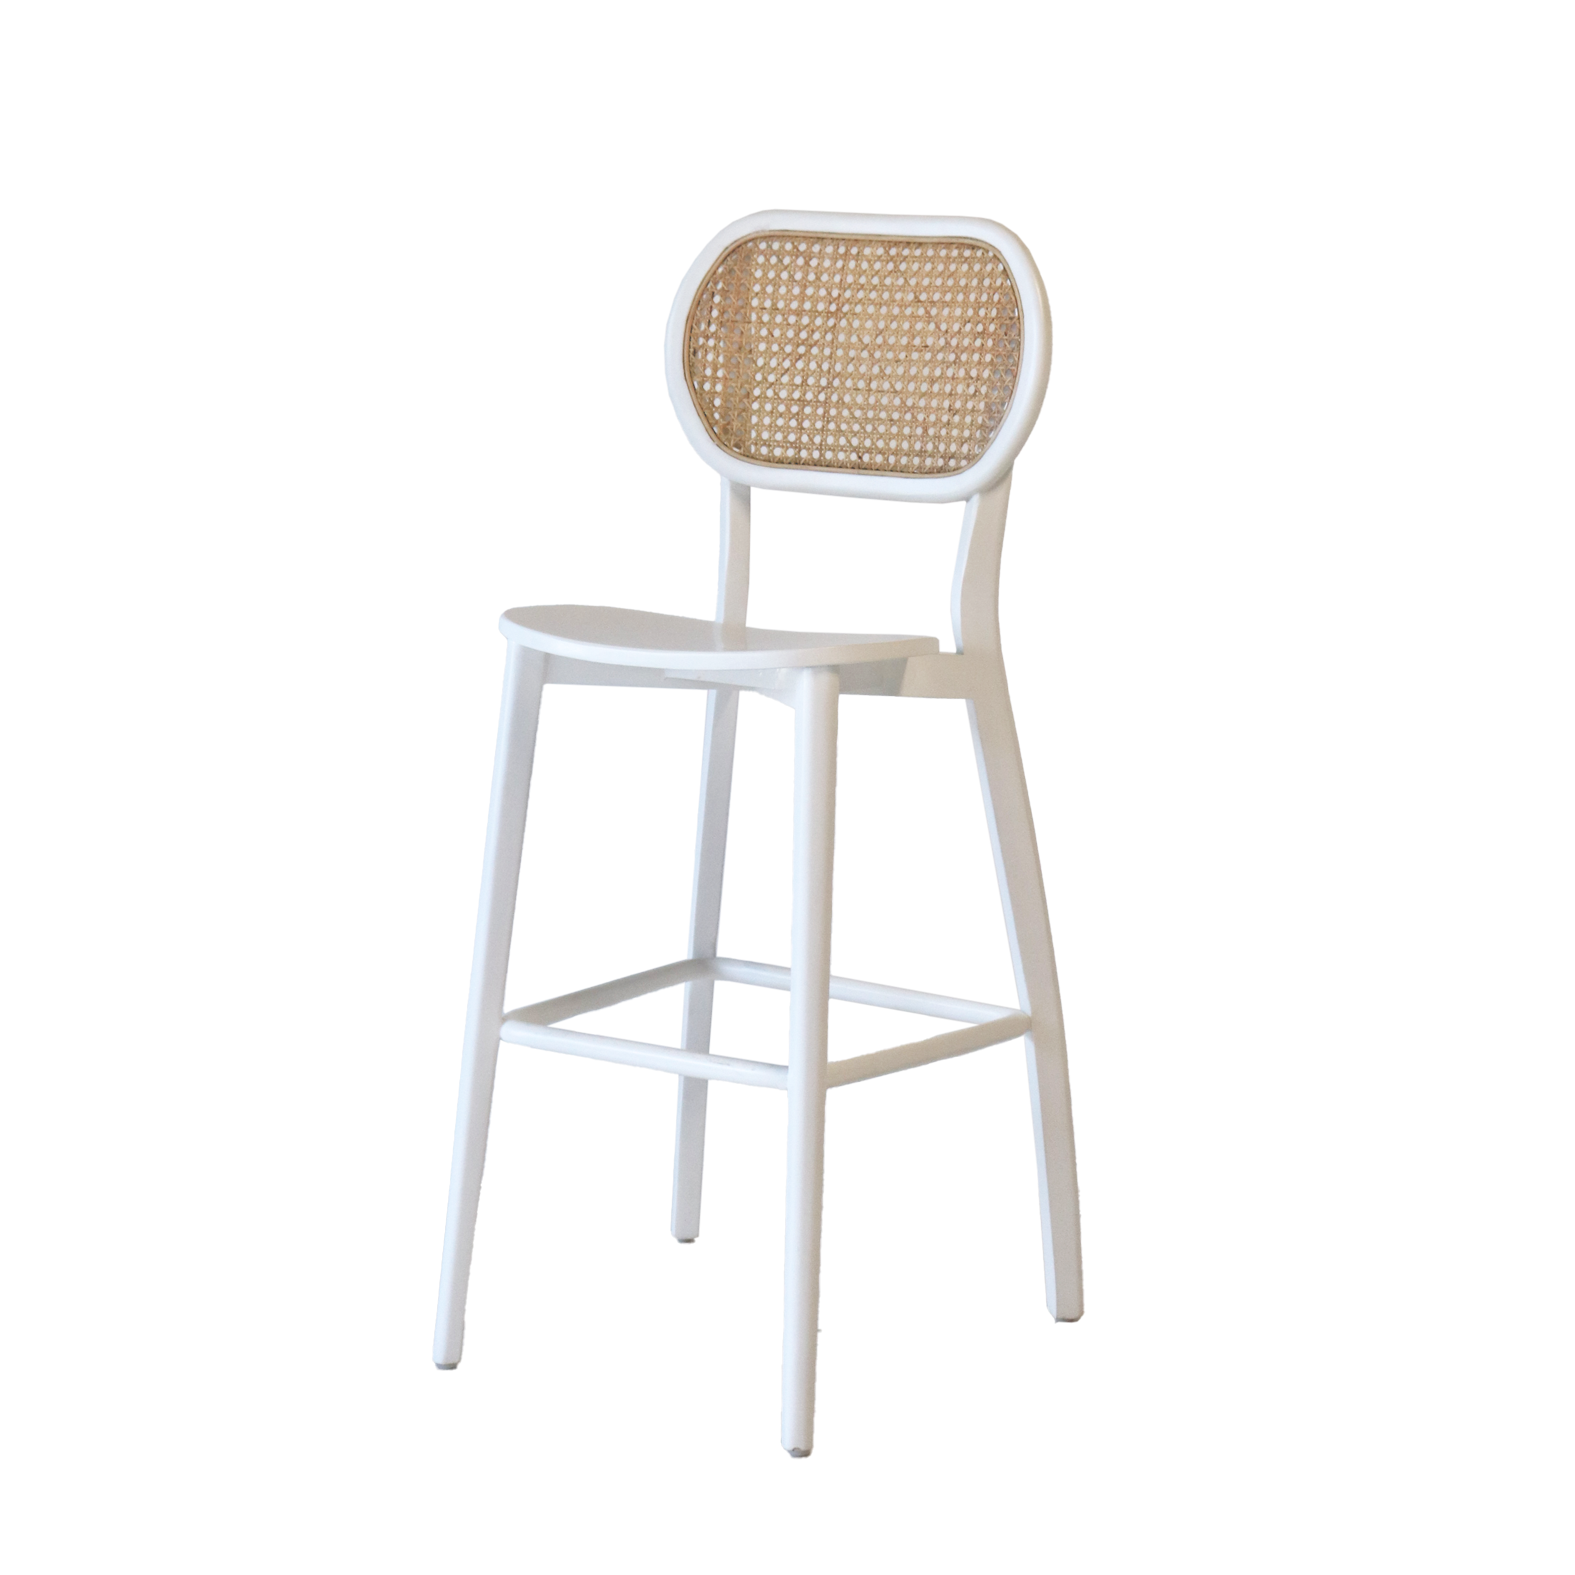 White and Rattan Stool Hire